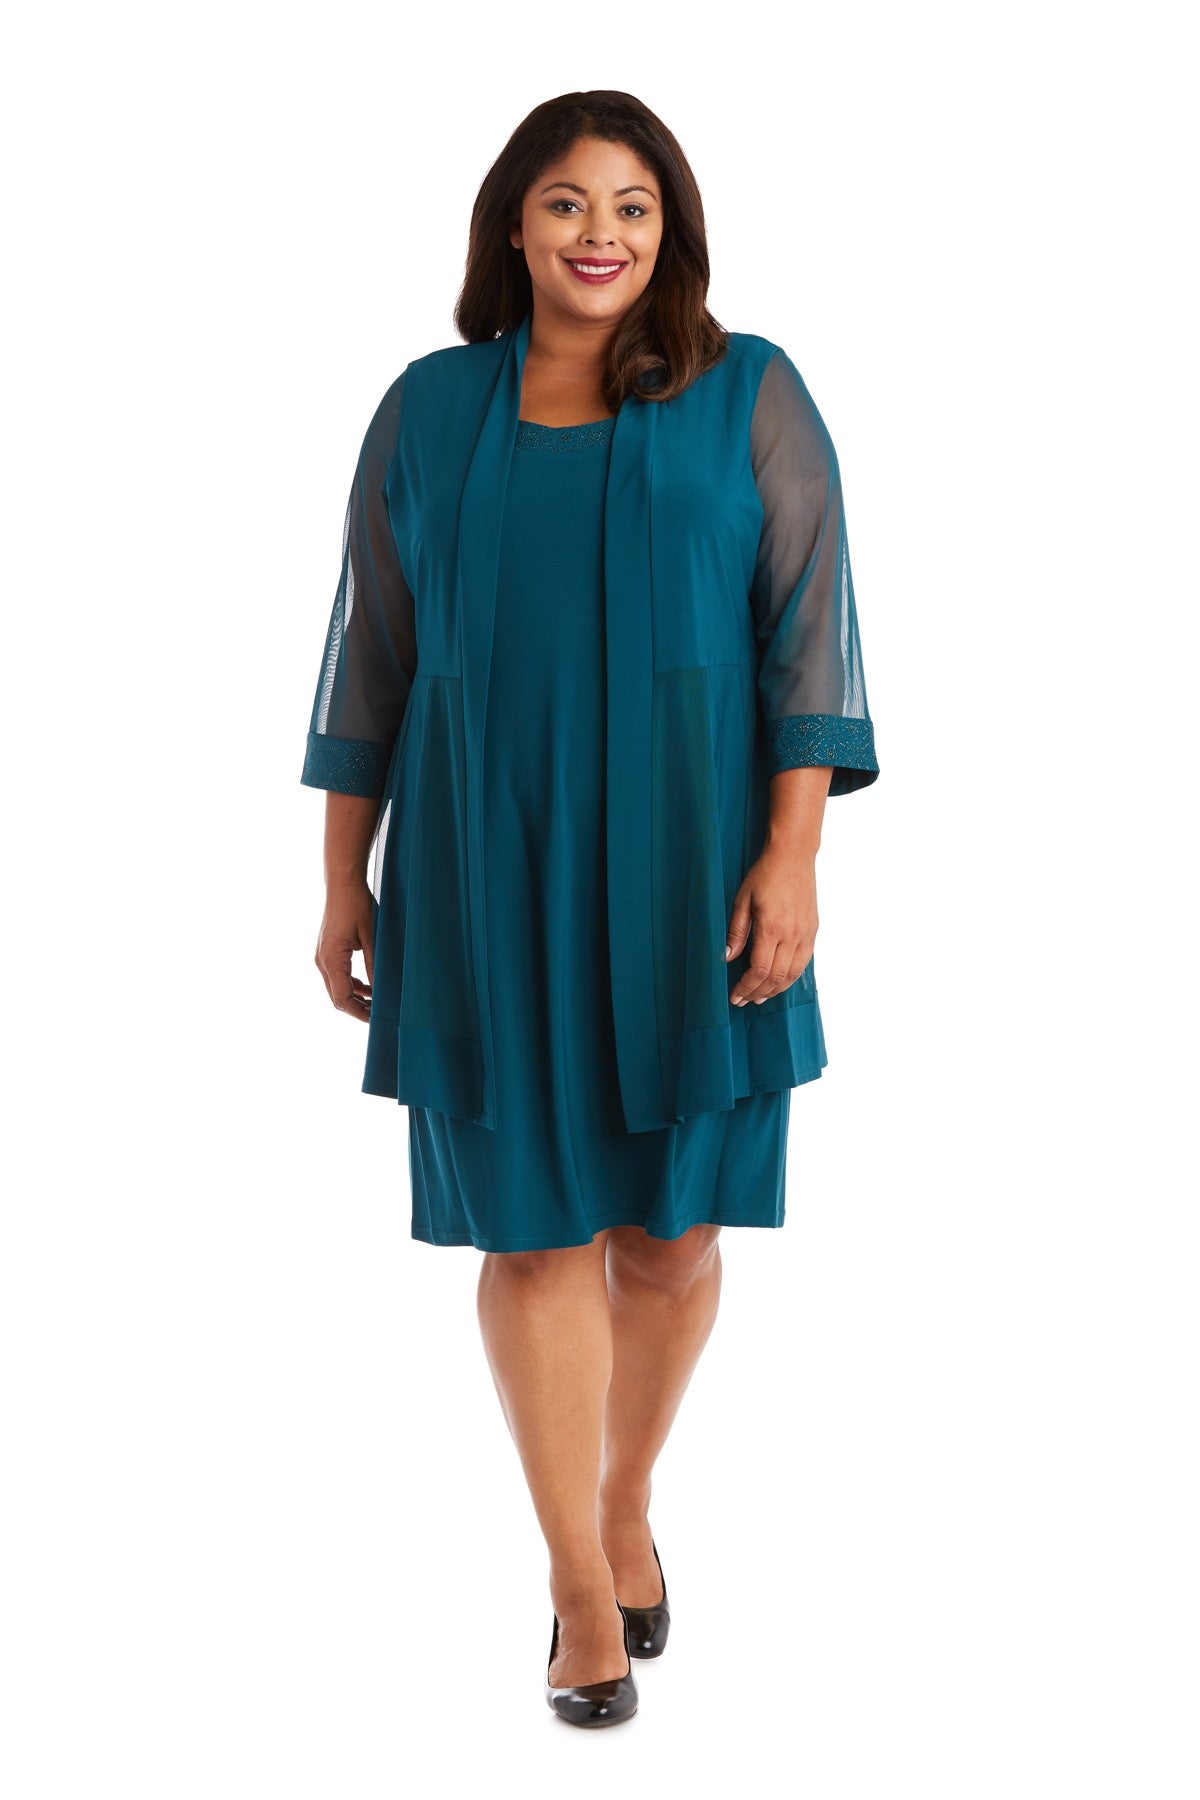 Shift Dress with Sparkling Neckline and Soft Jacket with Sheer Sleeves ...